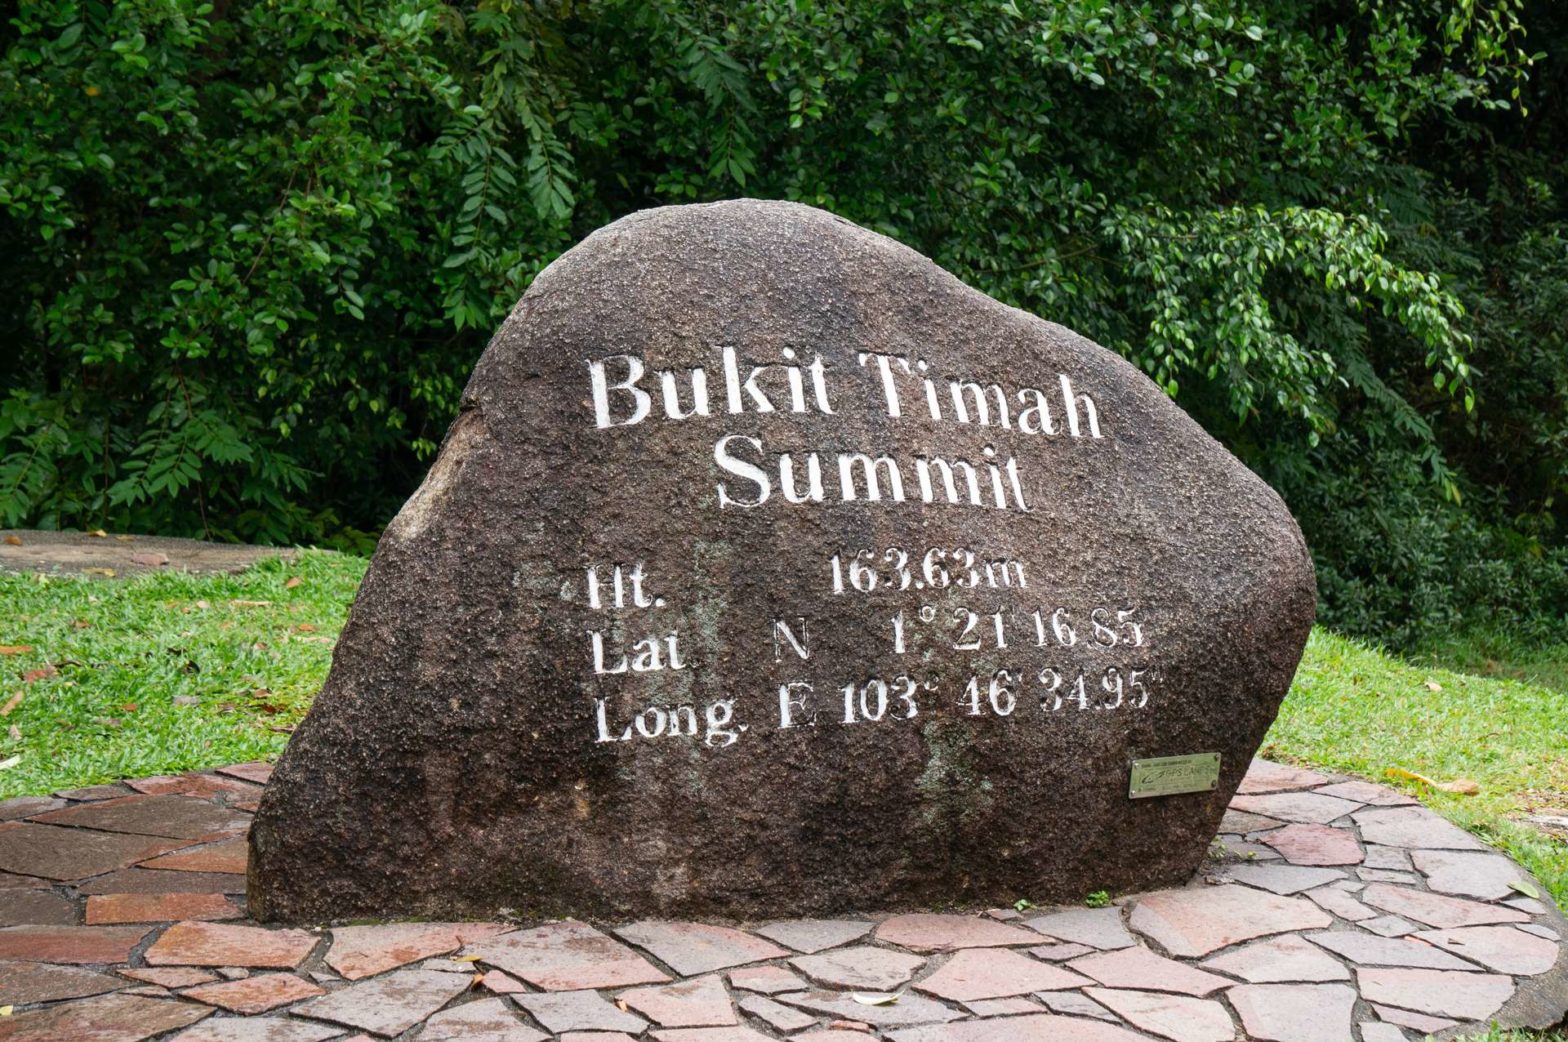 The rock at the summit of Bukit Timah at 164 m above sea level.